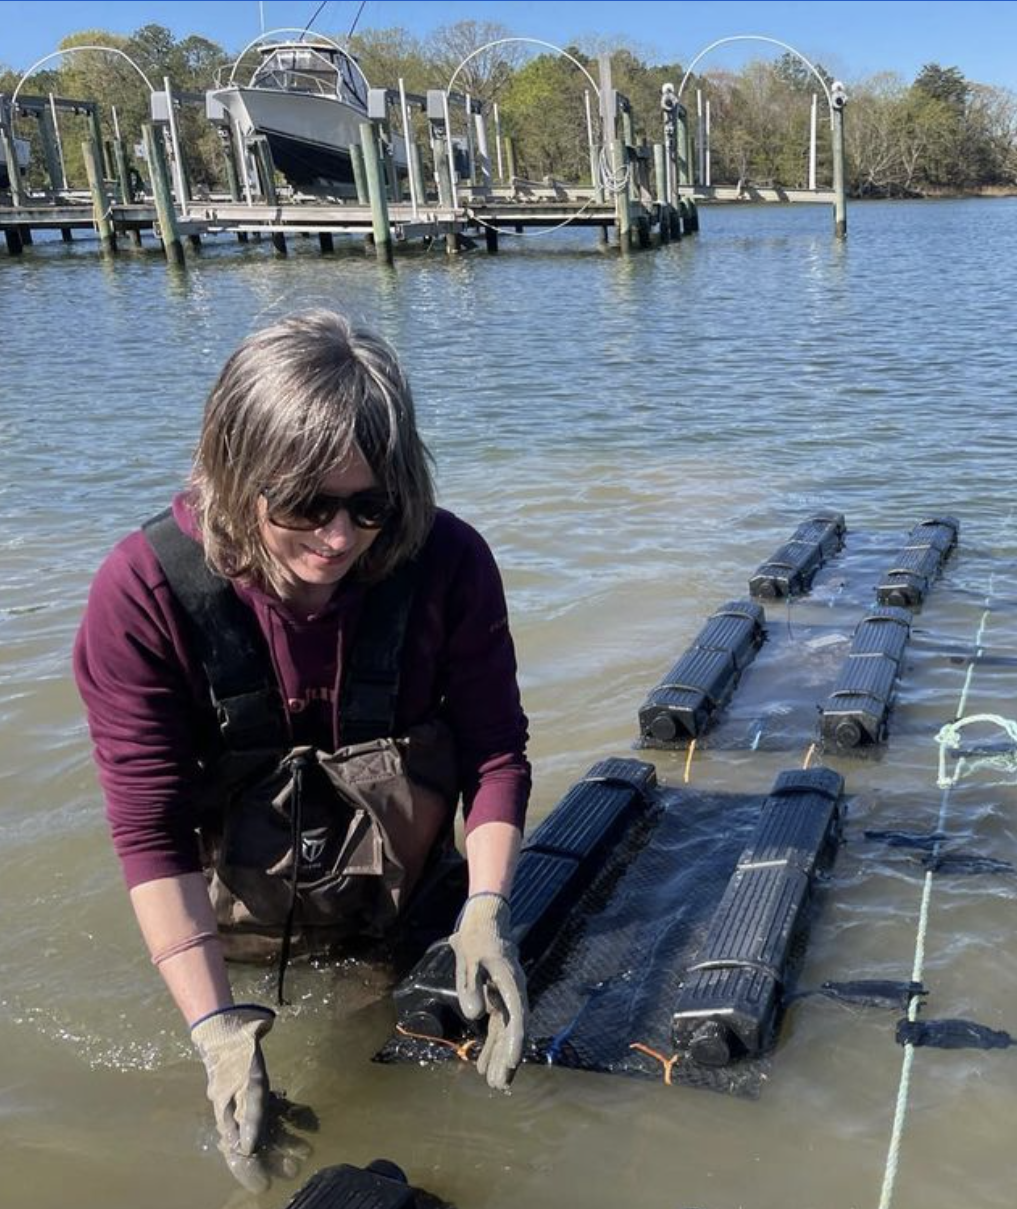 Dr. Corinne Audemard conducting research in collaboration with the shellfish aquaculture industry. Photo credit: Bill Walton